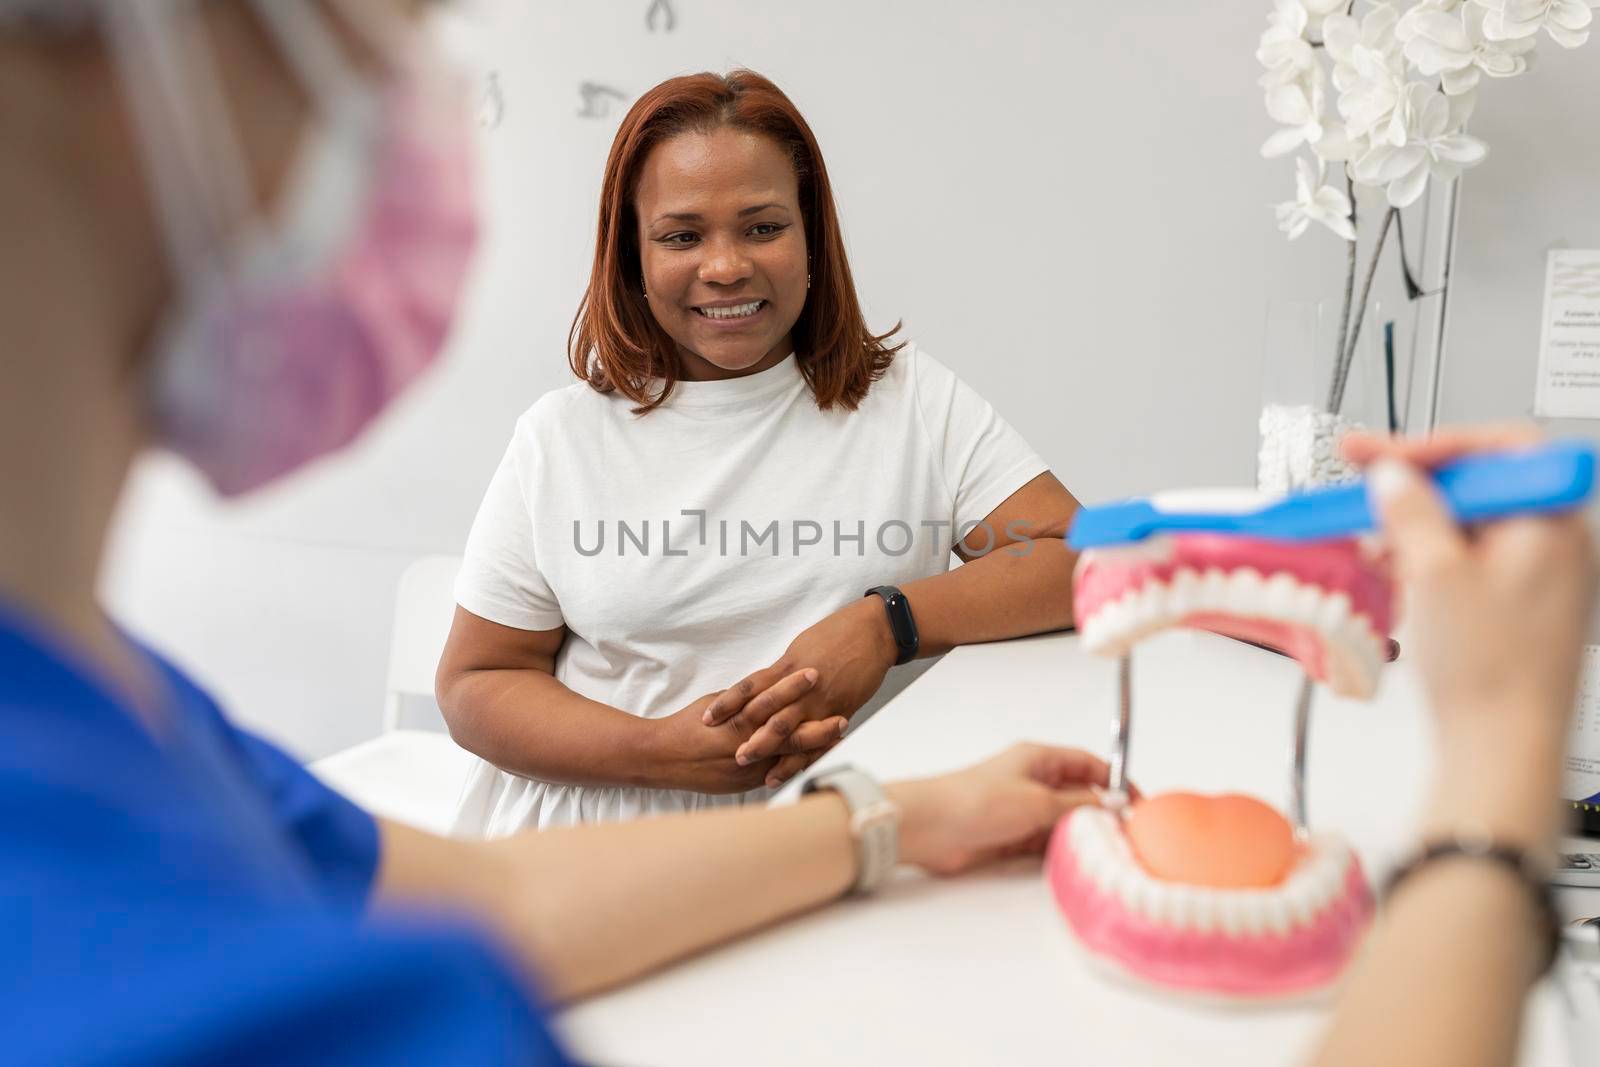 A black woman patient watches her dentist's explanation on how to correctly brush her teeth by stockrojoverdeyazul